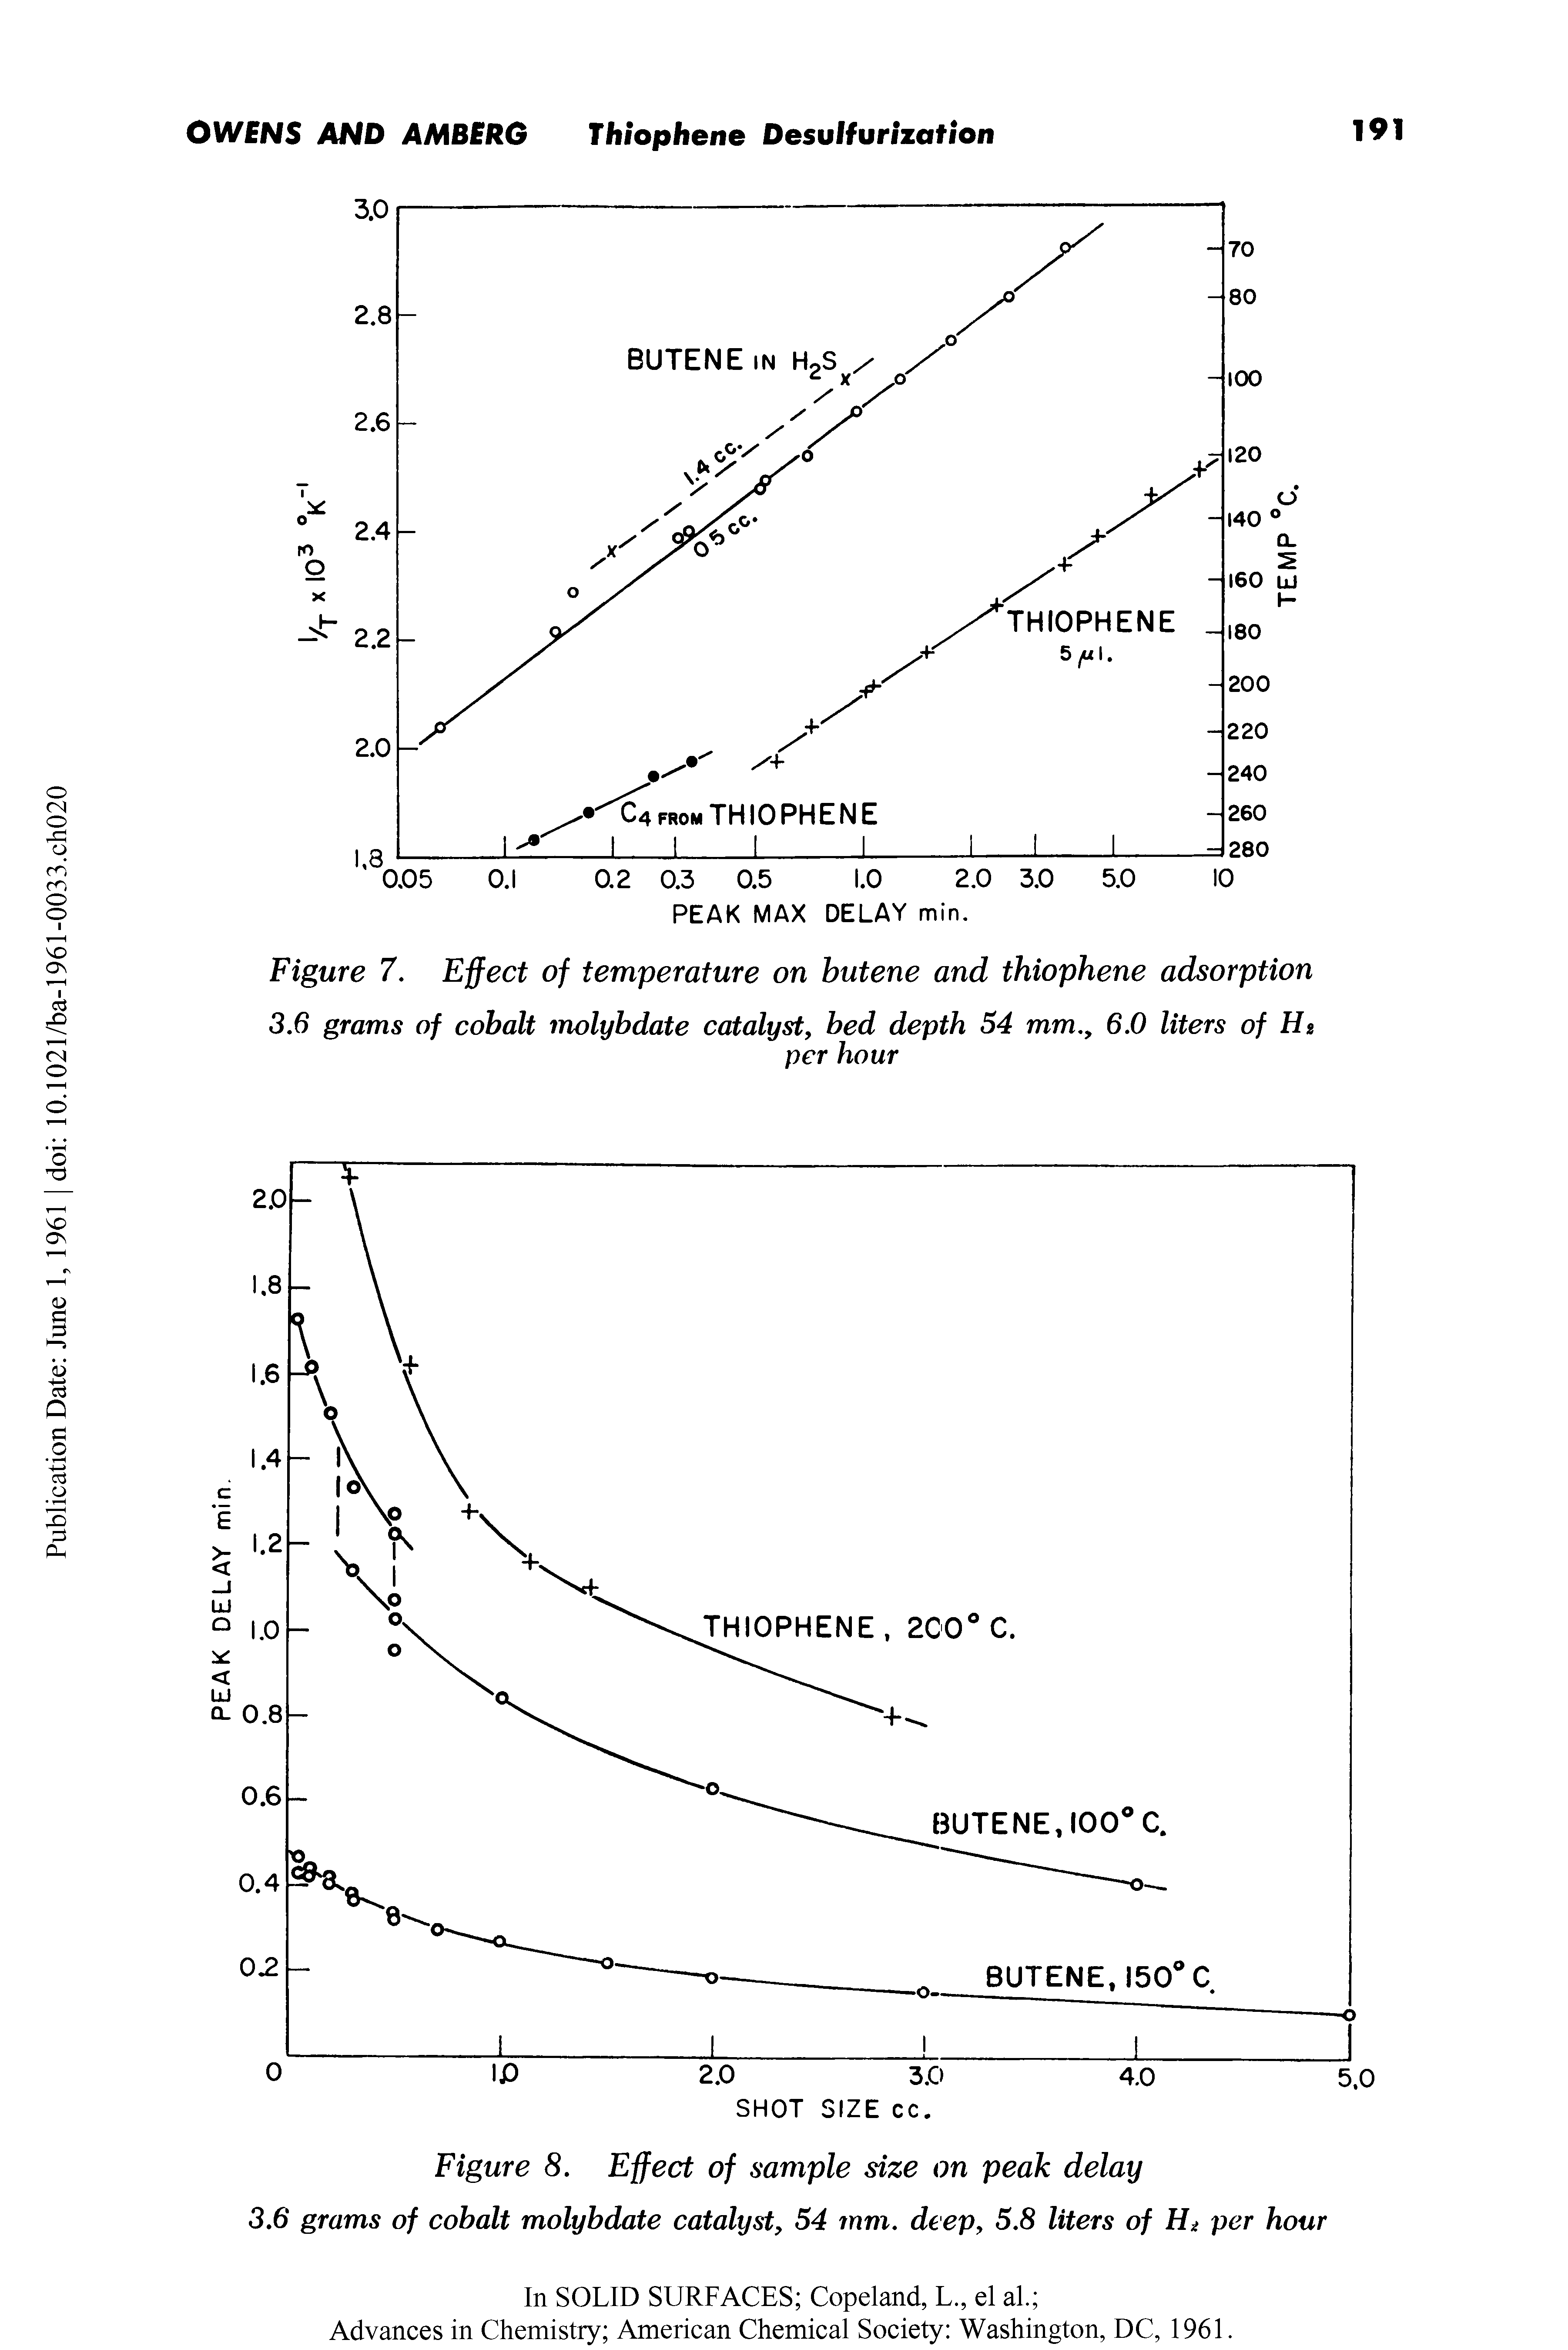 Figure 7. Effect of temperature on butene and thiophene adsorption...